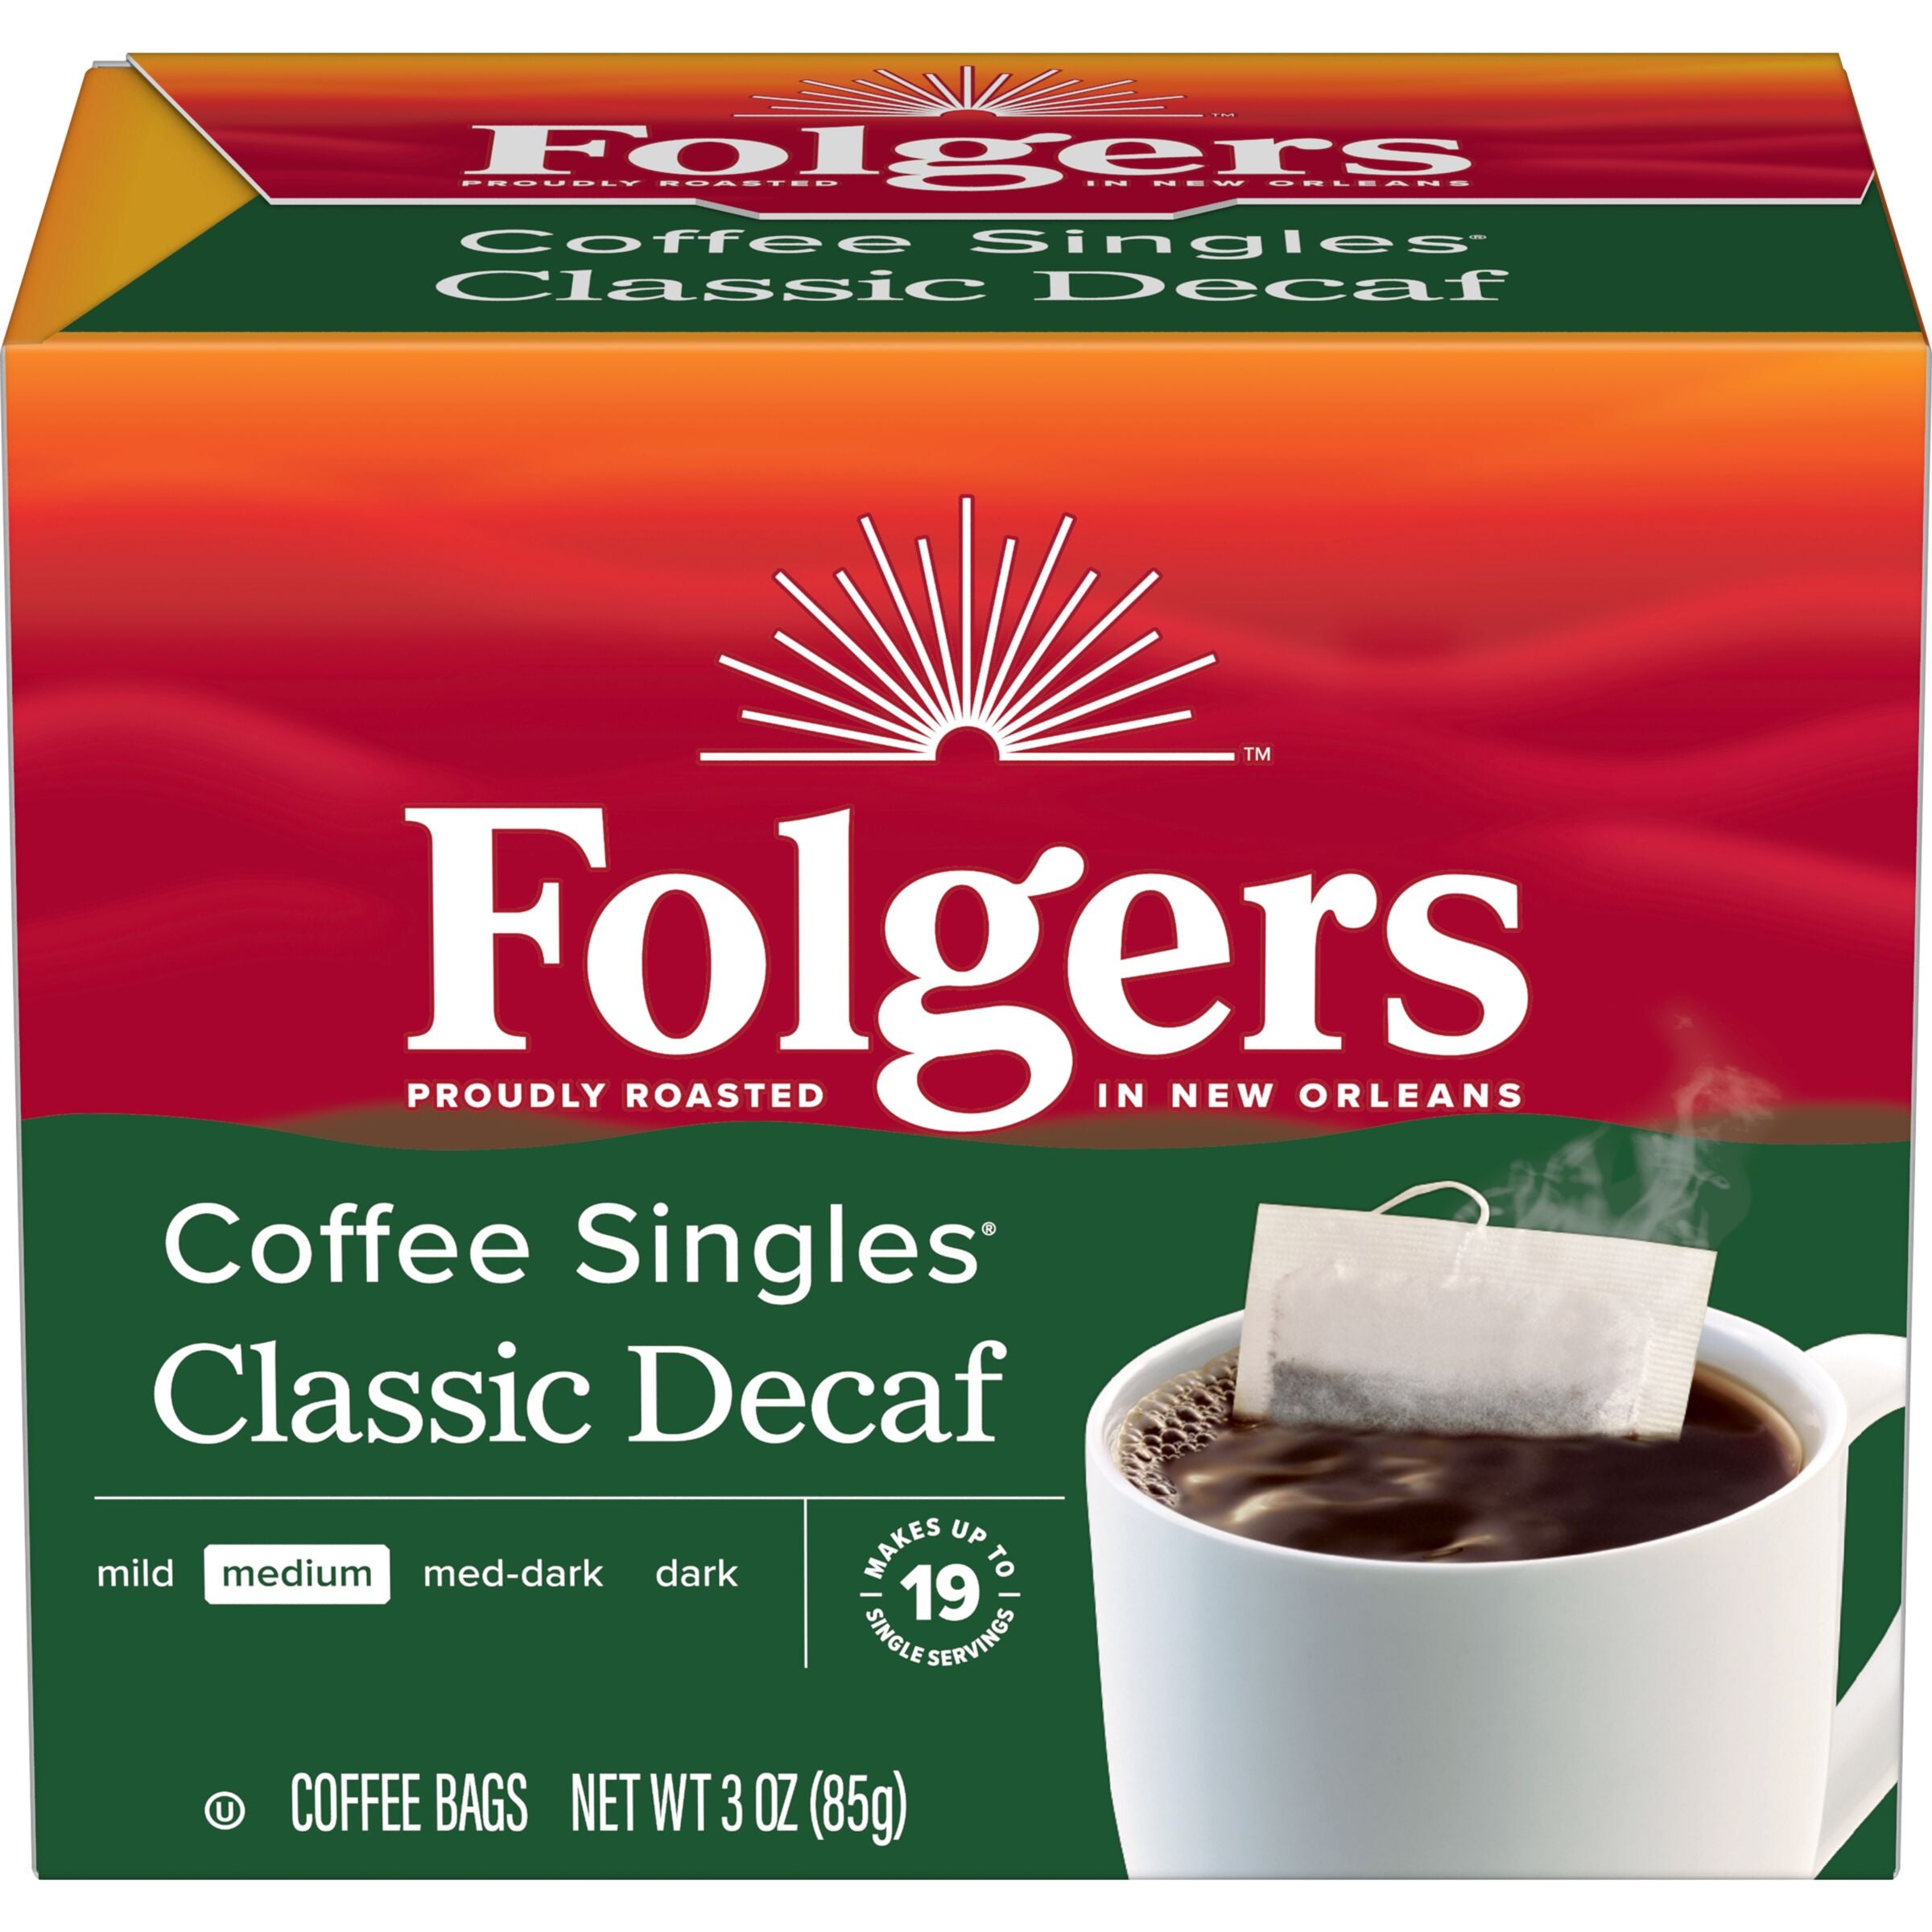 Folgers Coffee Singles Classic Decaf Coffee Bags, 19 Count